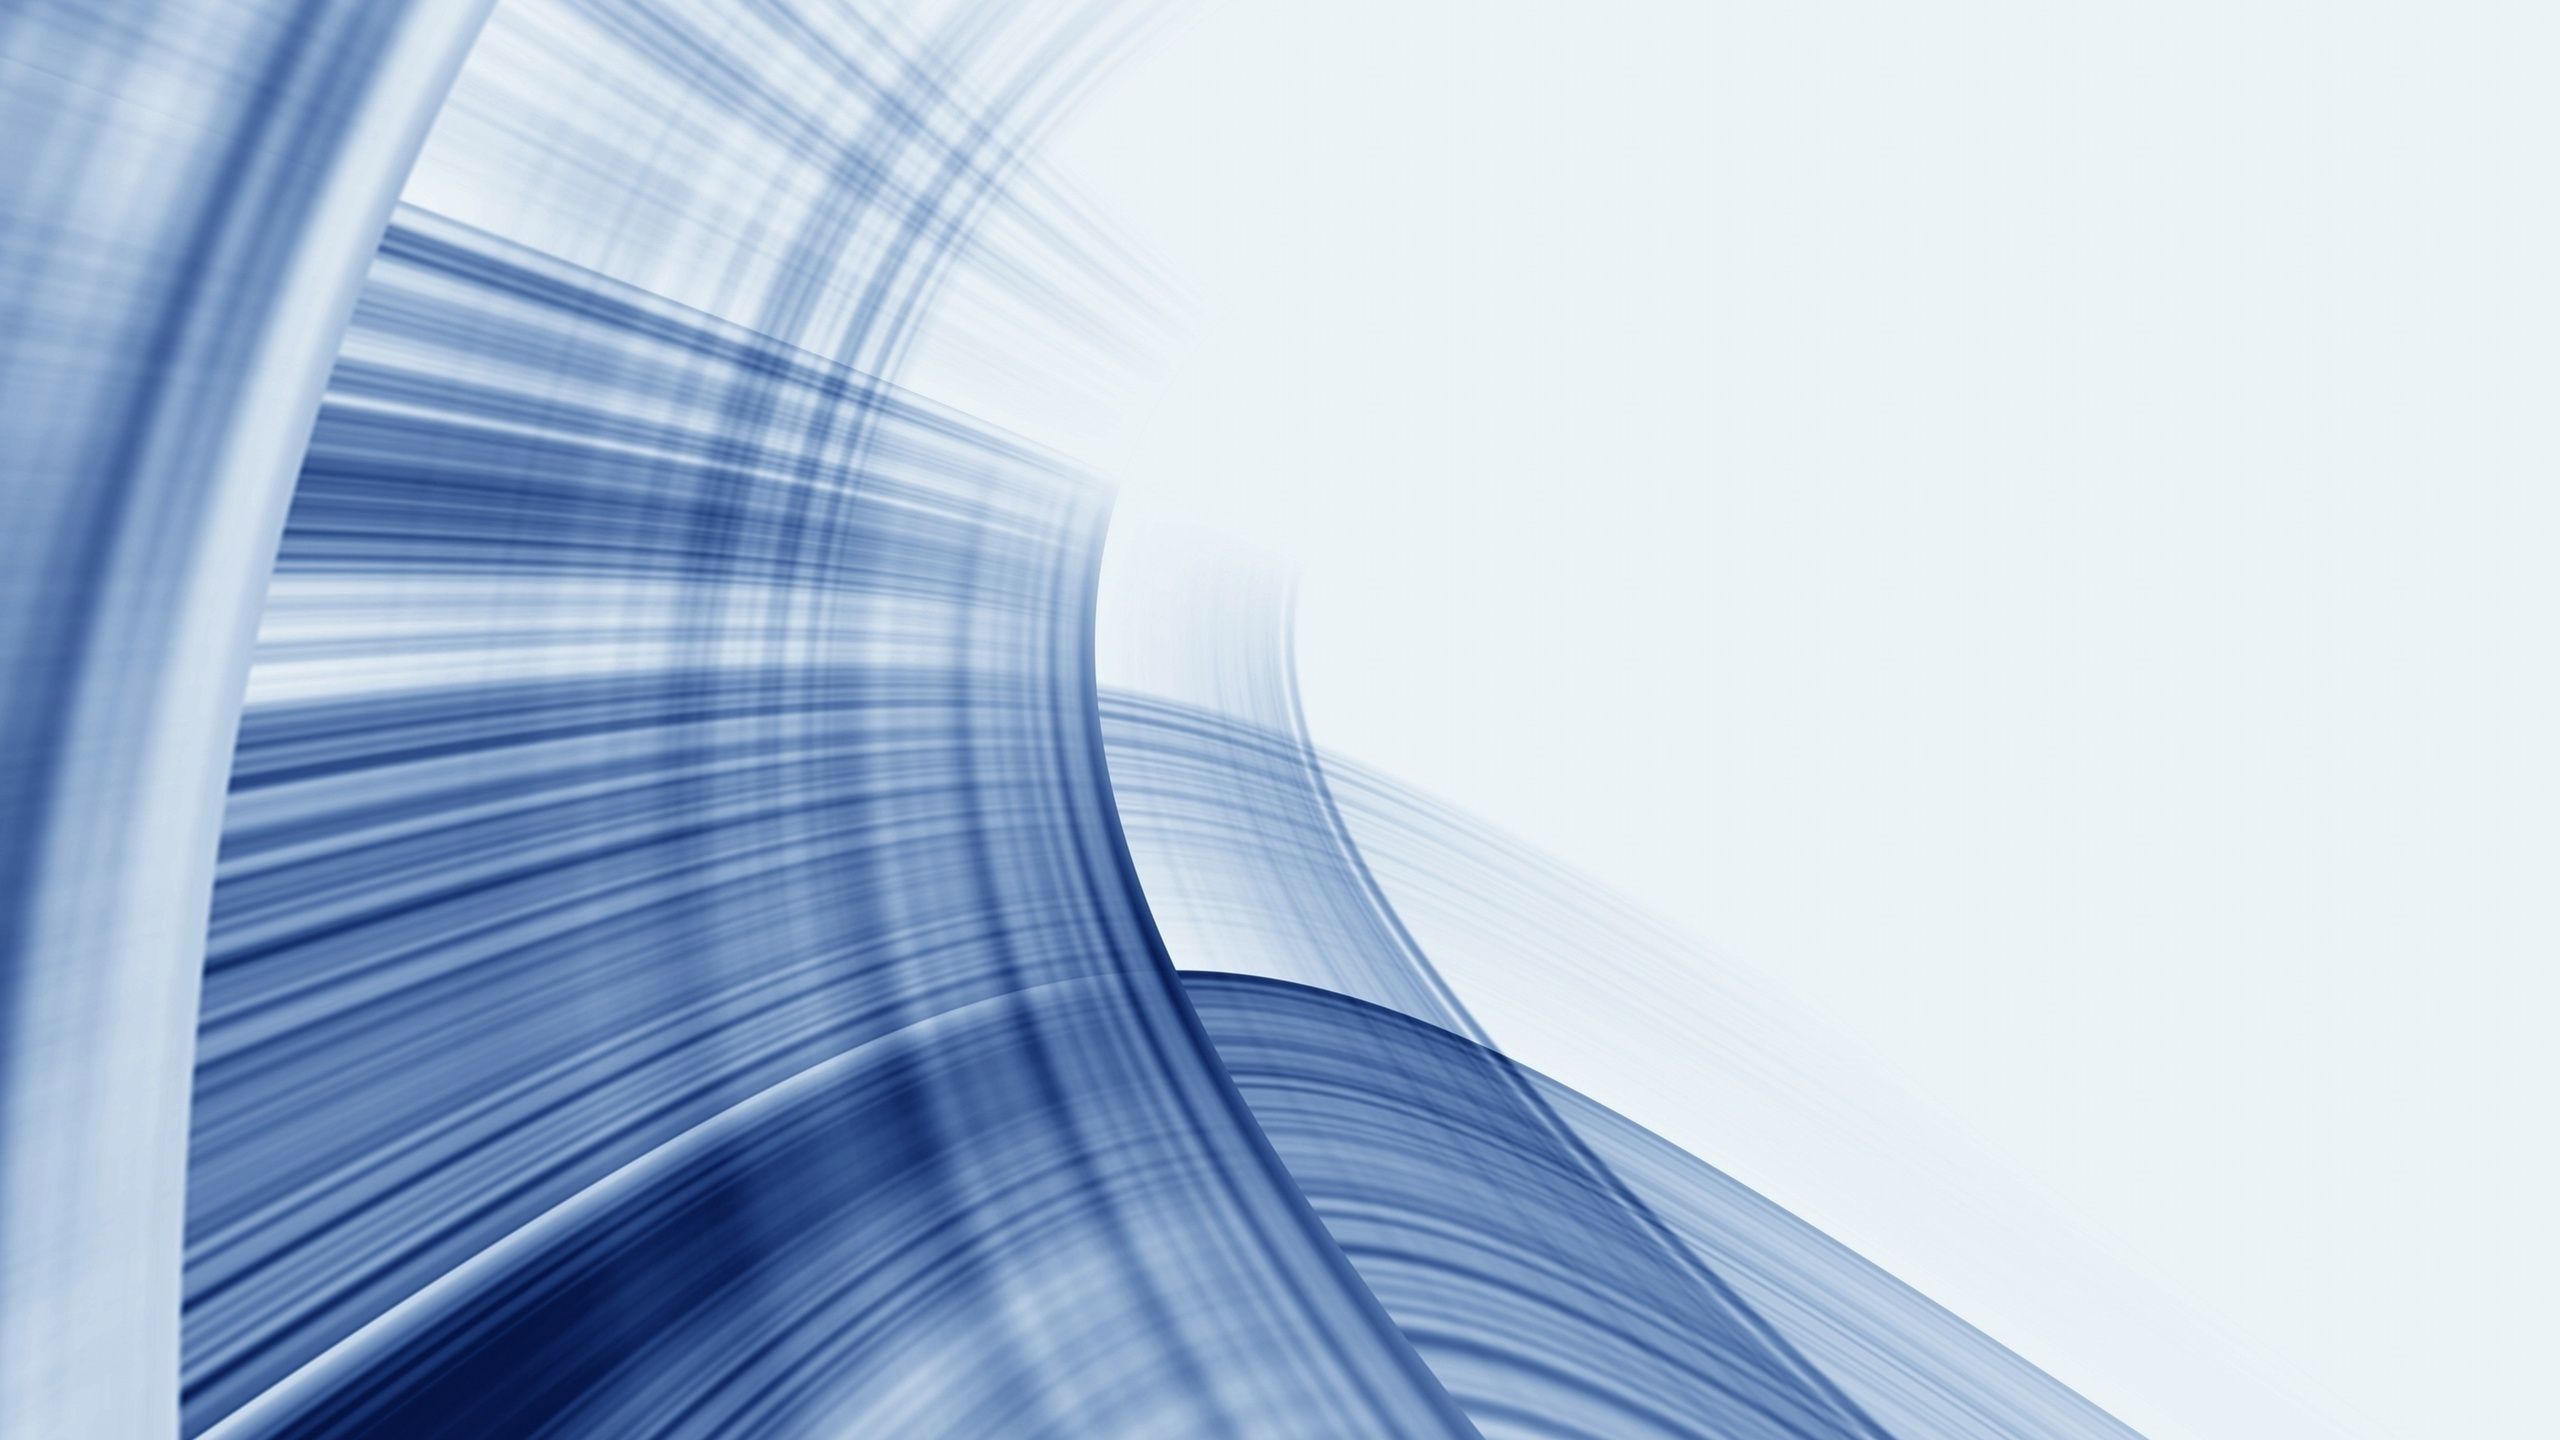 Free download Blue and White wallpaper 2560x1440 44334 2560x1440